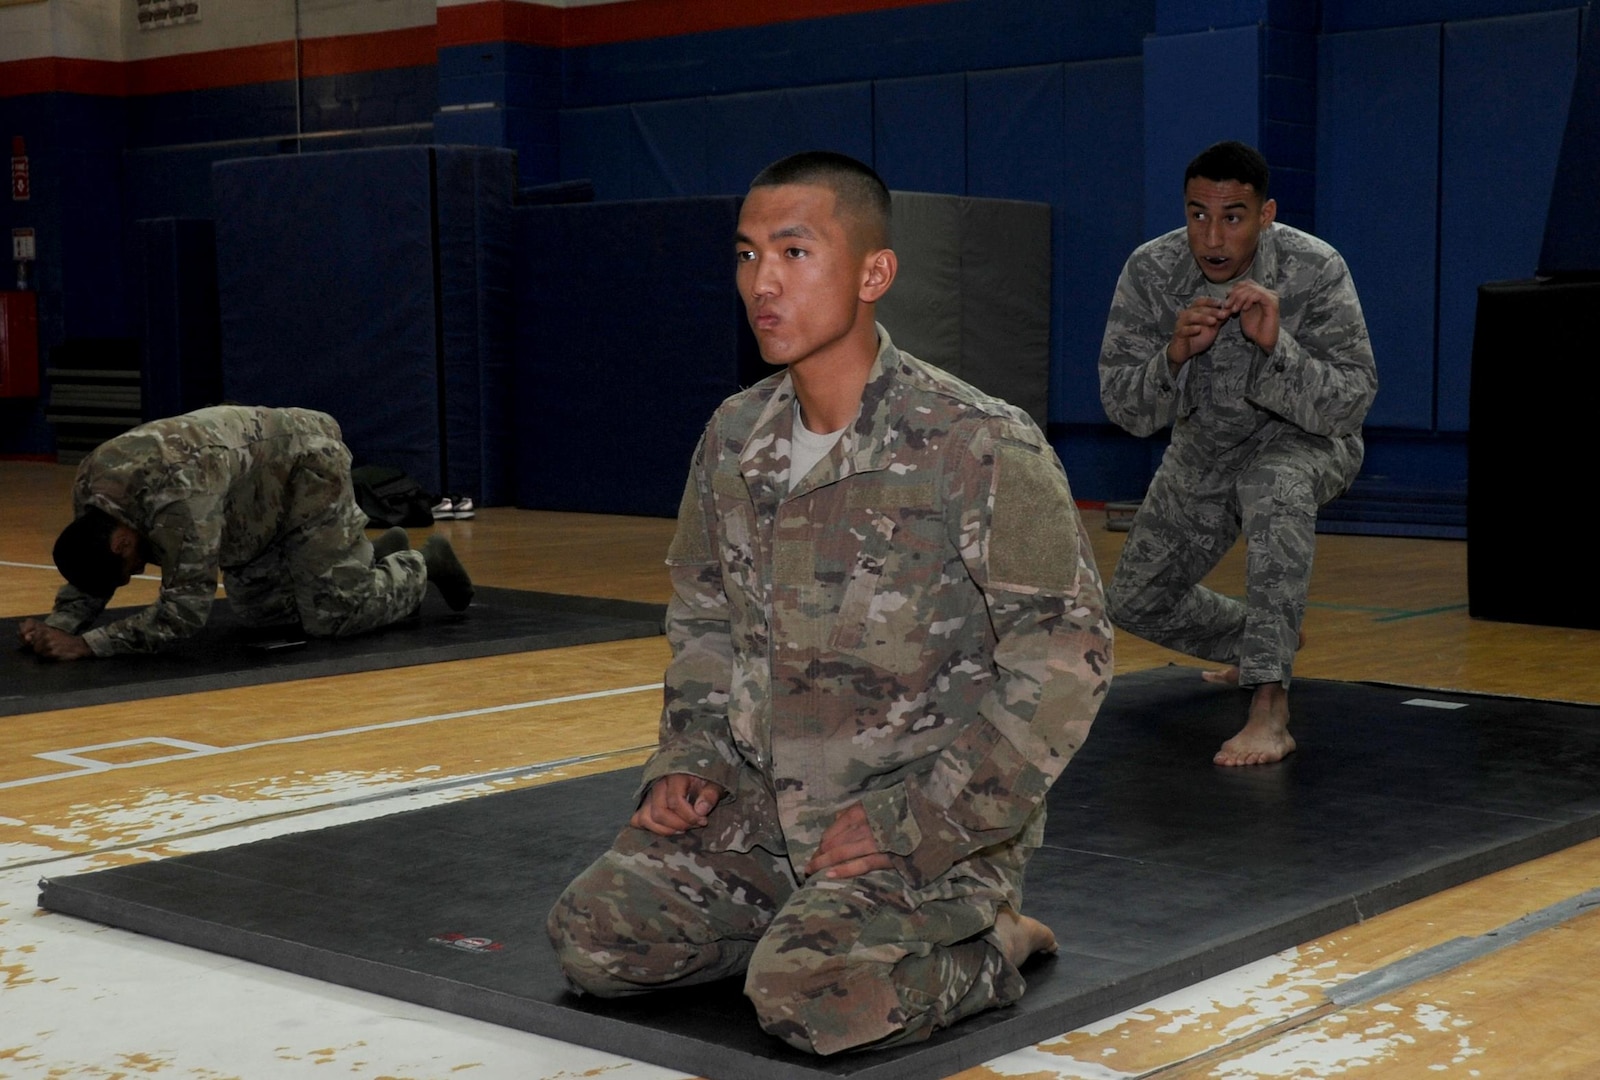 Pfc. Pham Viet, a Delta 144th Air Defense Artillery wheel mechanic, center, and Senior Airman Dominic Rivera, a 386th Expeditionary Maintenance Squadron craftsman, right, stretch before a fight during an Army combatives tournament at an undisclosed location in Southwest Asia Jan. 22, 2017. Viet and Rivera both trained daily together to prepare themselves for the mixed martial arts competition. (U.S. Air Force photo/Tech. Sgt. Kenneth McCann)


 